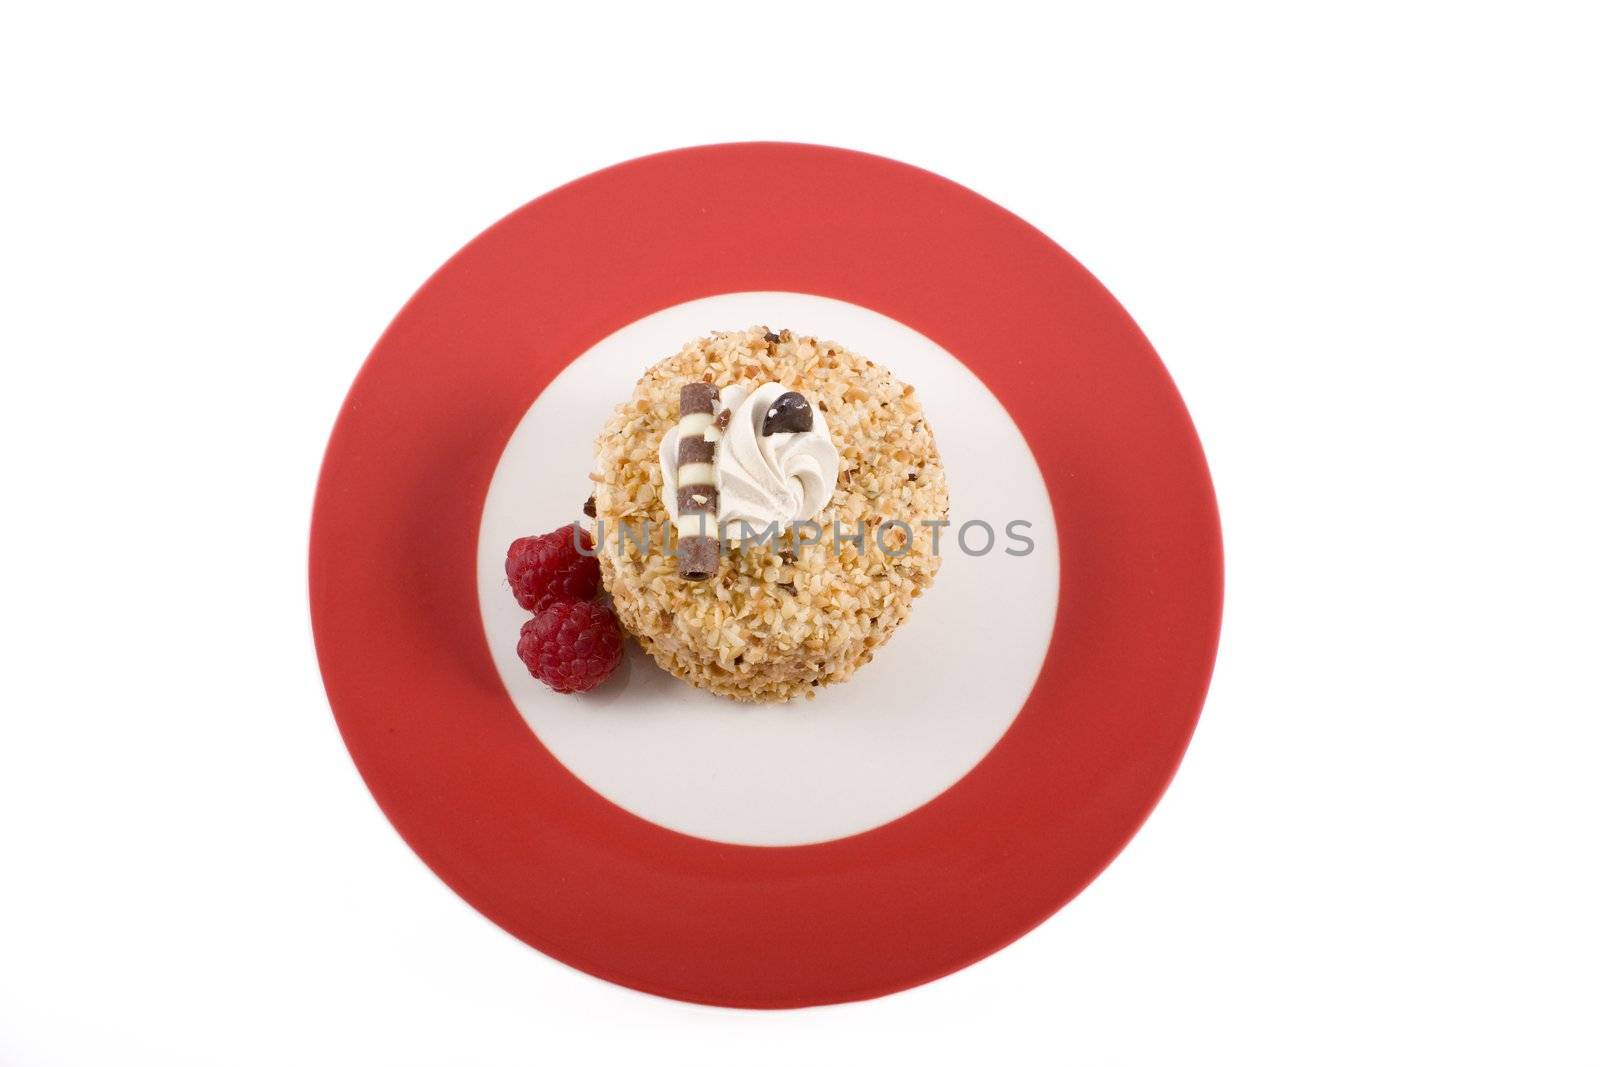 Hazelnut cake on red plate with raspberries.  Shot from directly above and isolated on white background.